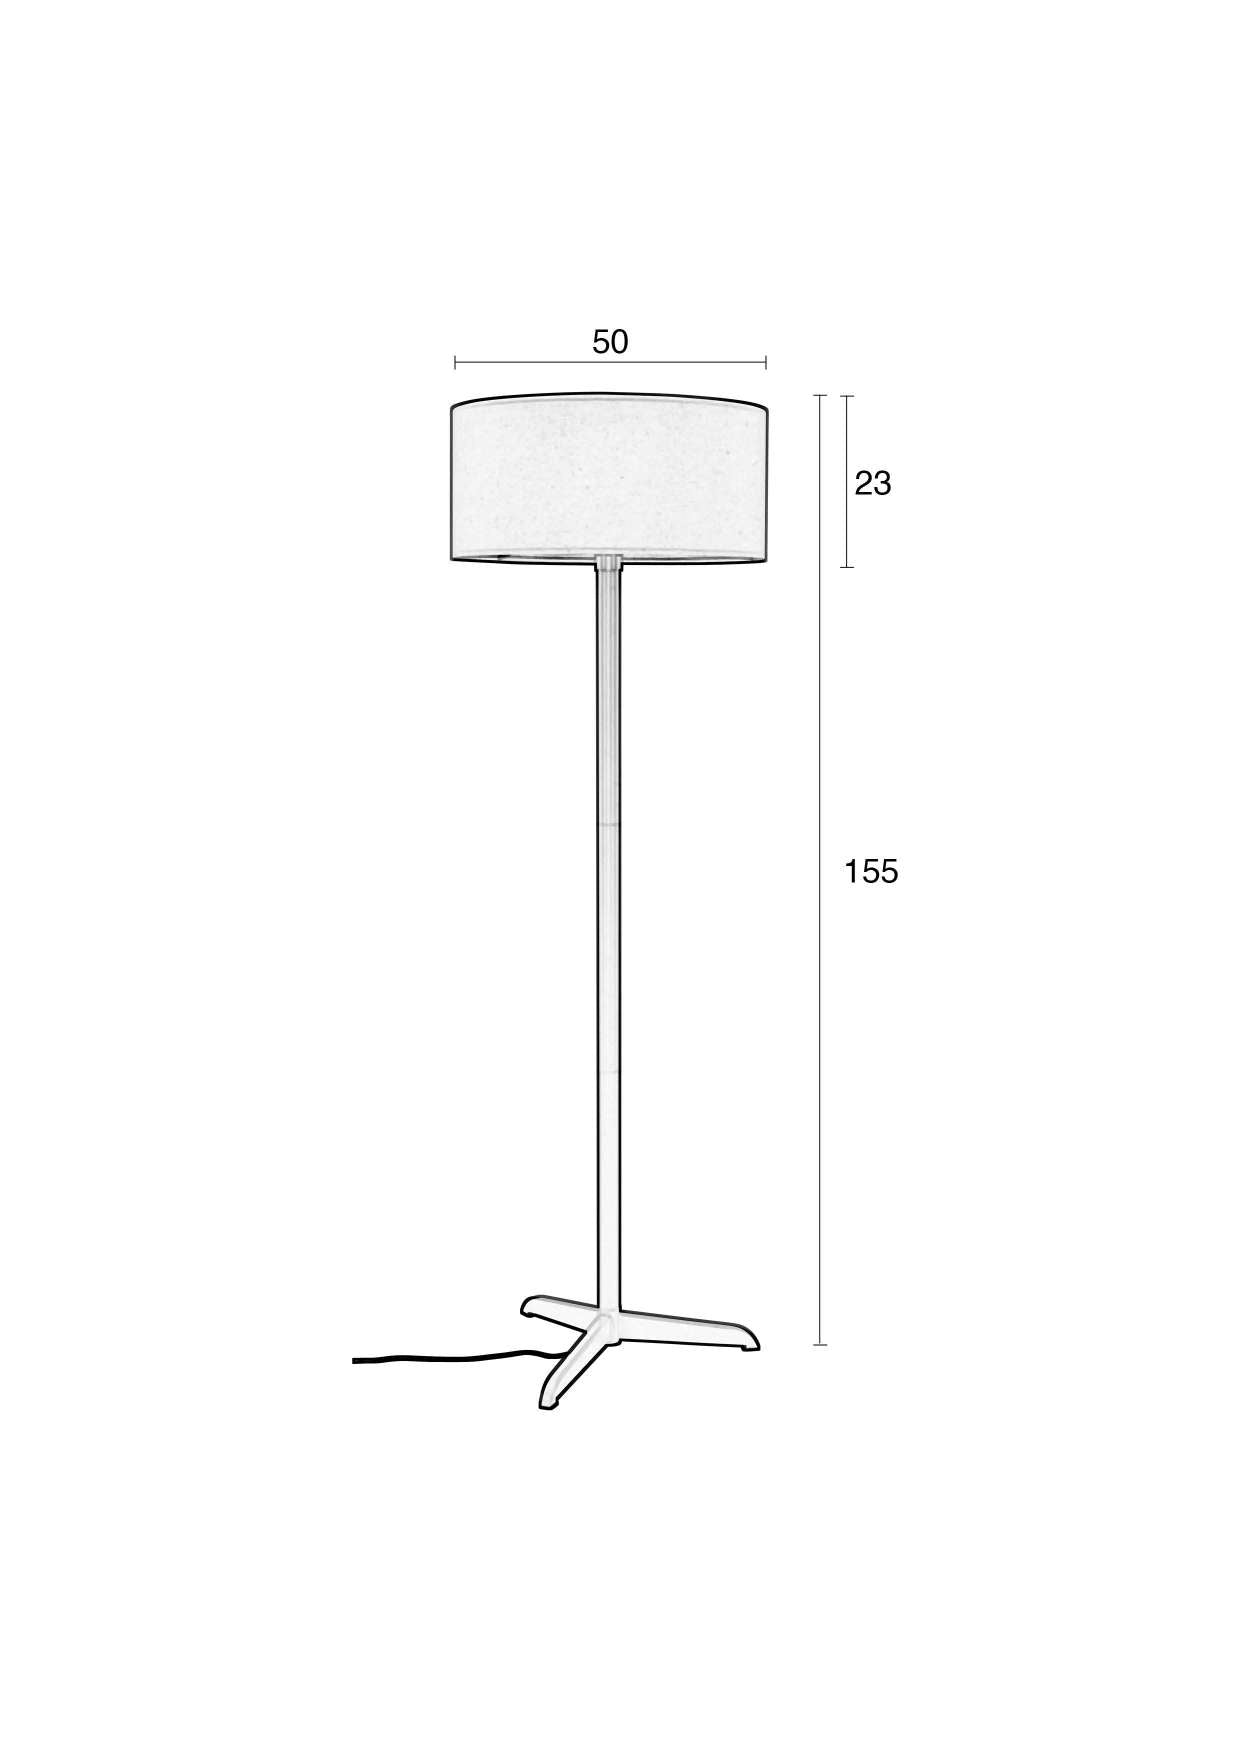 Zuiver | FLOOR LAMP SHELBY TAUPE Default Title